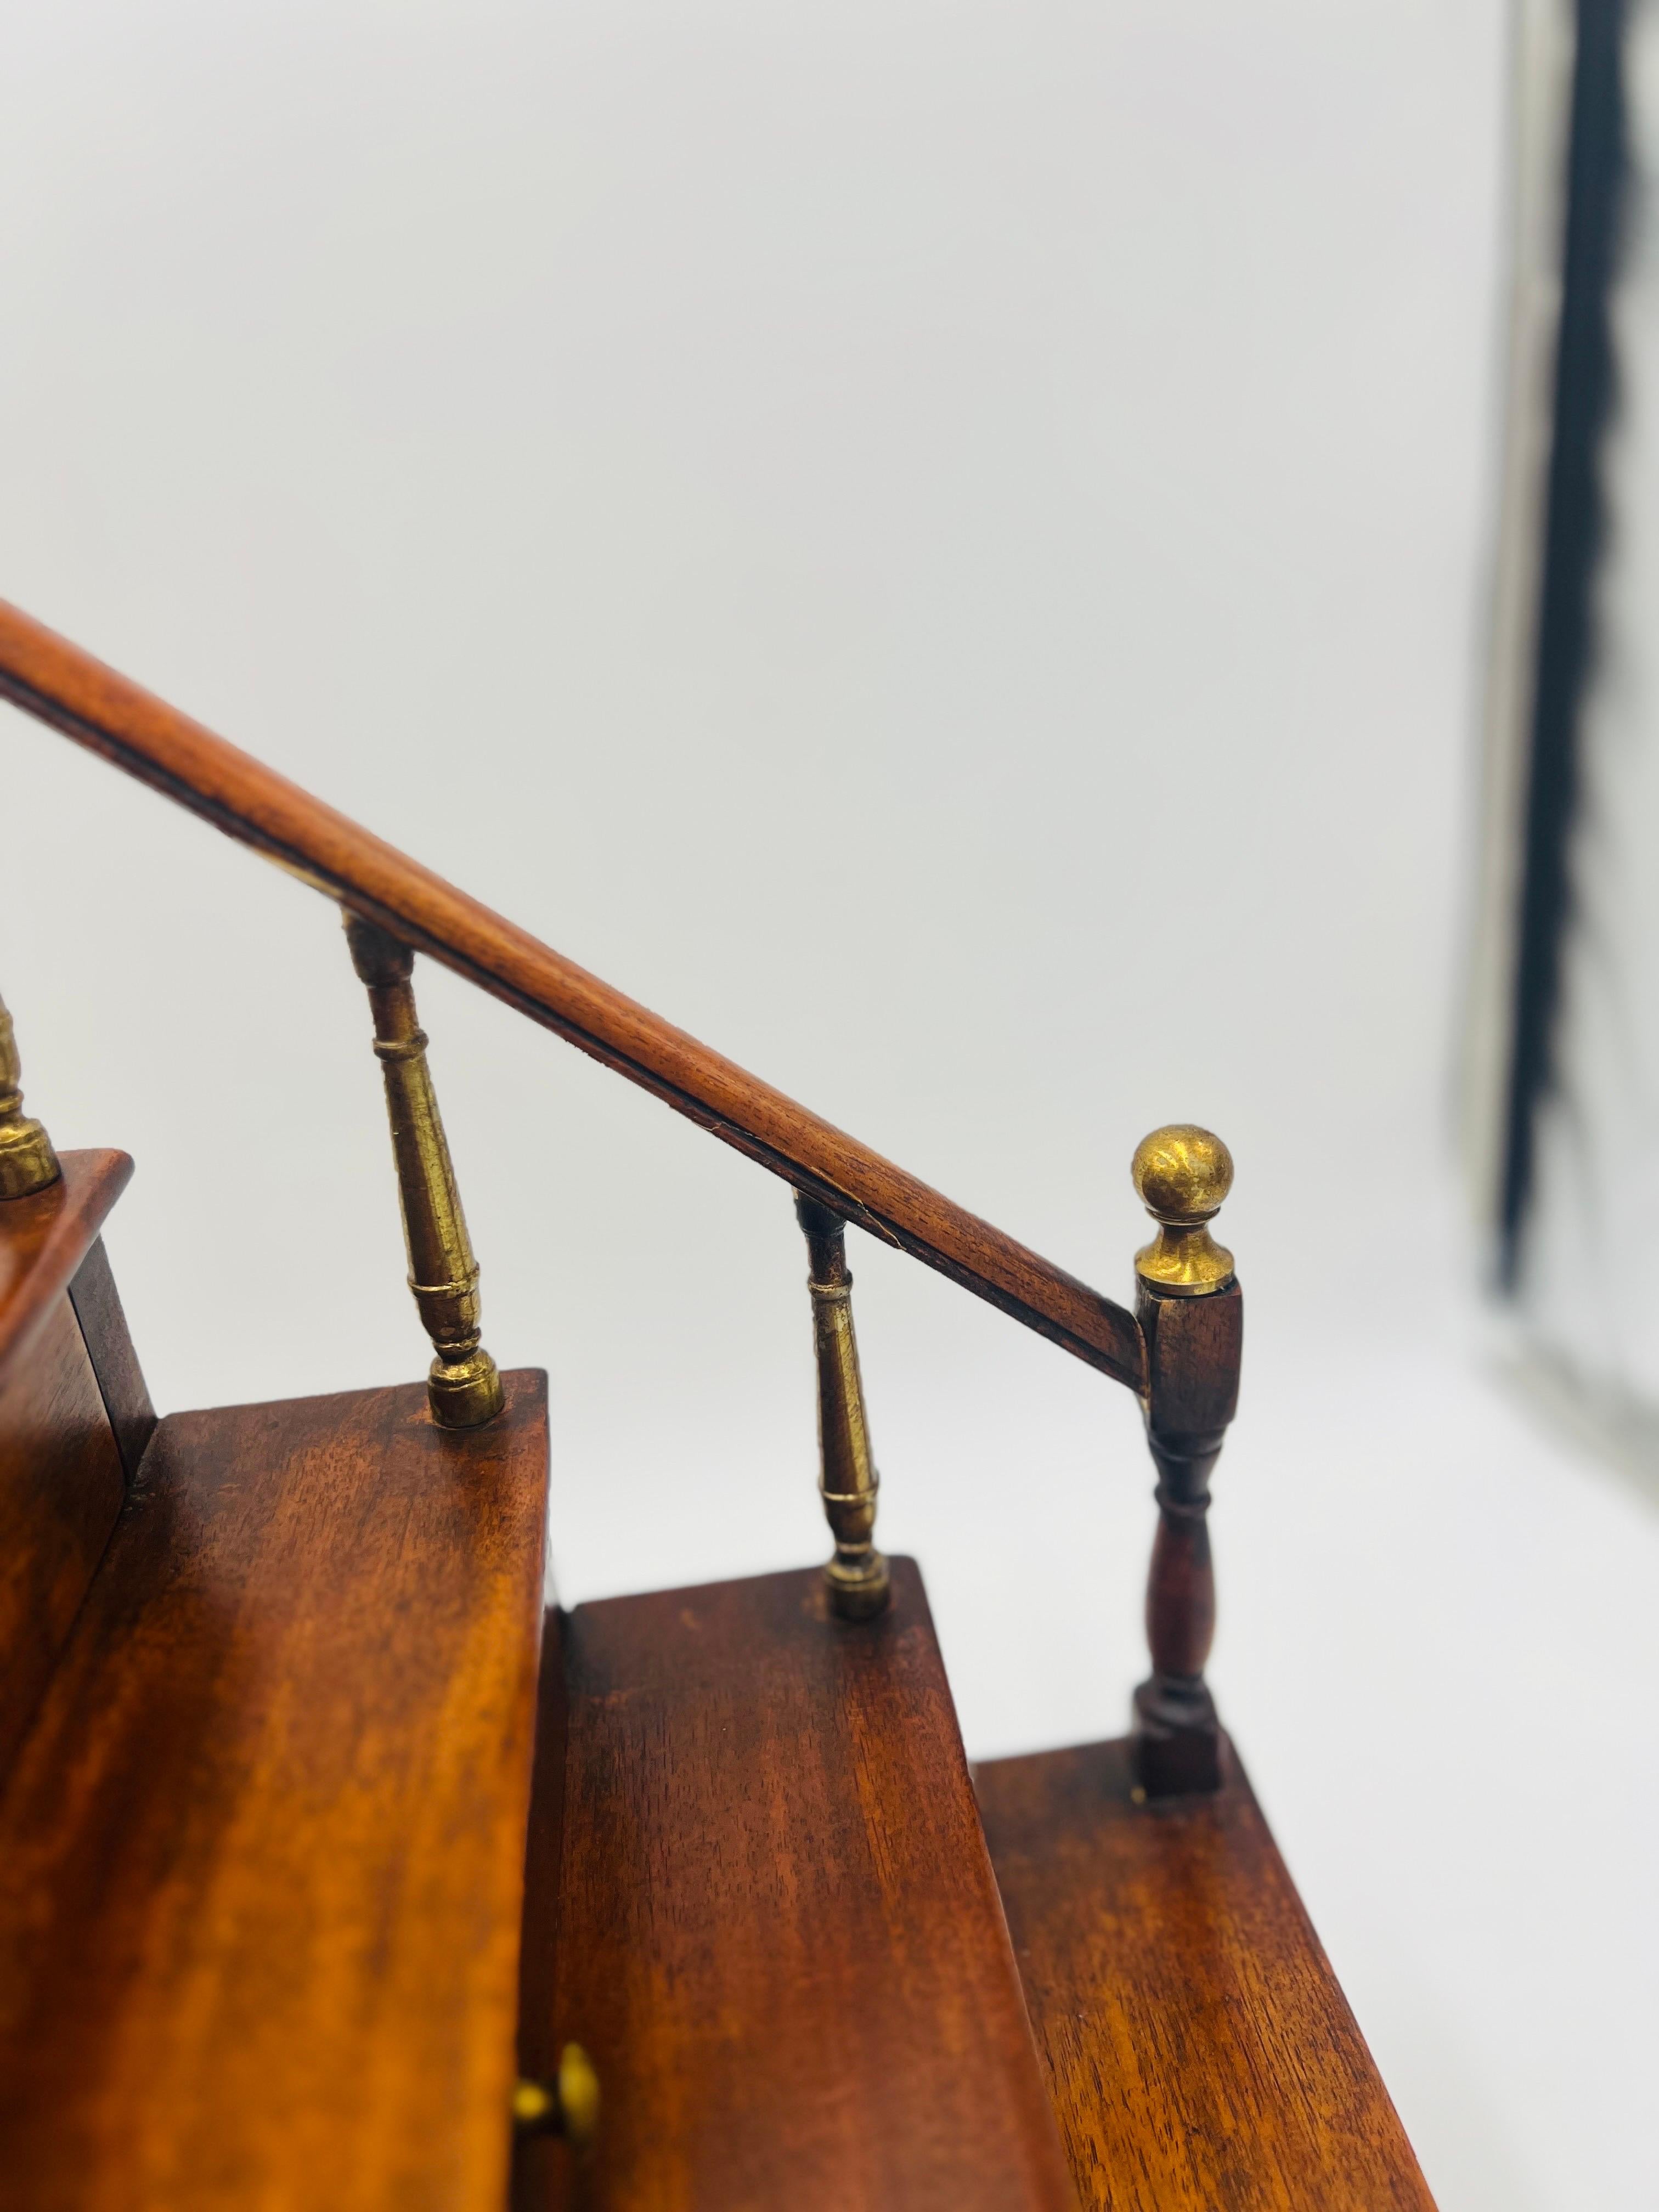 Antique Edwardian Mahogany Staircase Model with Brass Finial Newel Posts For Sale 6